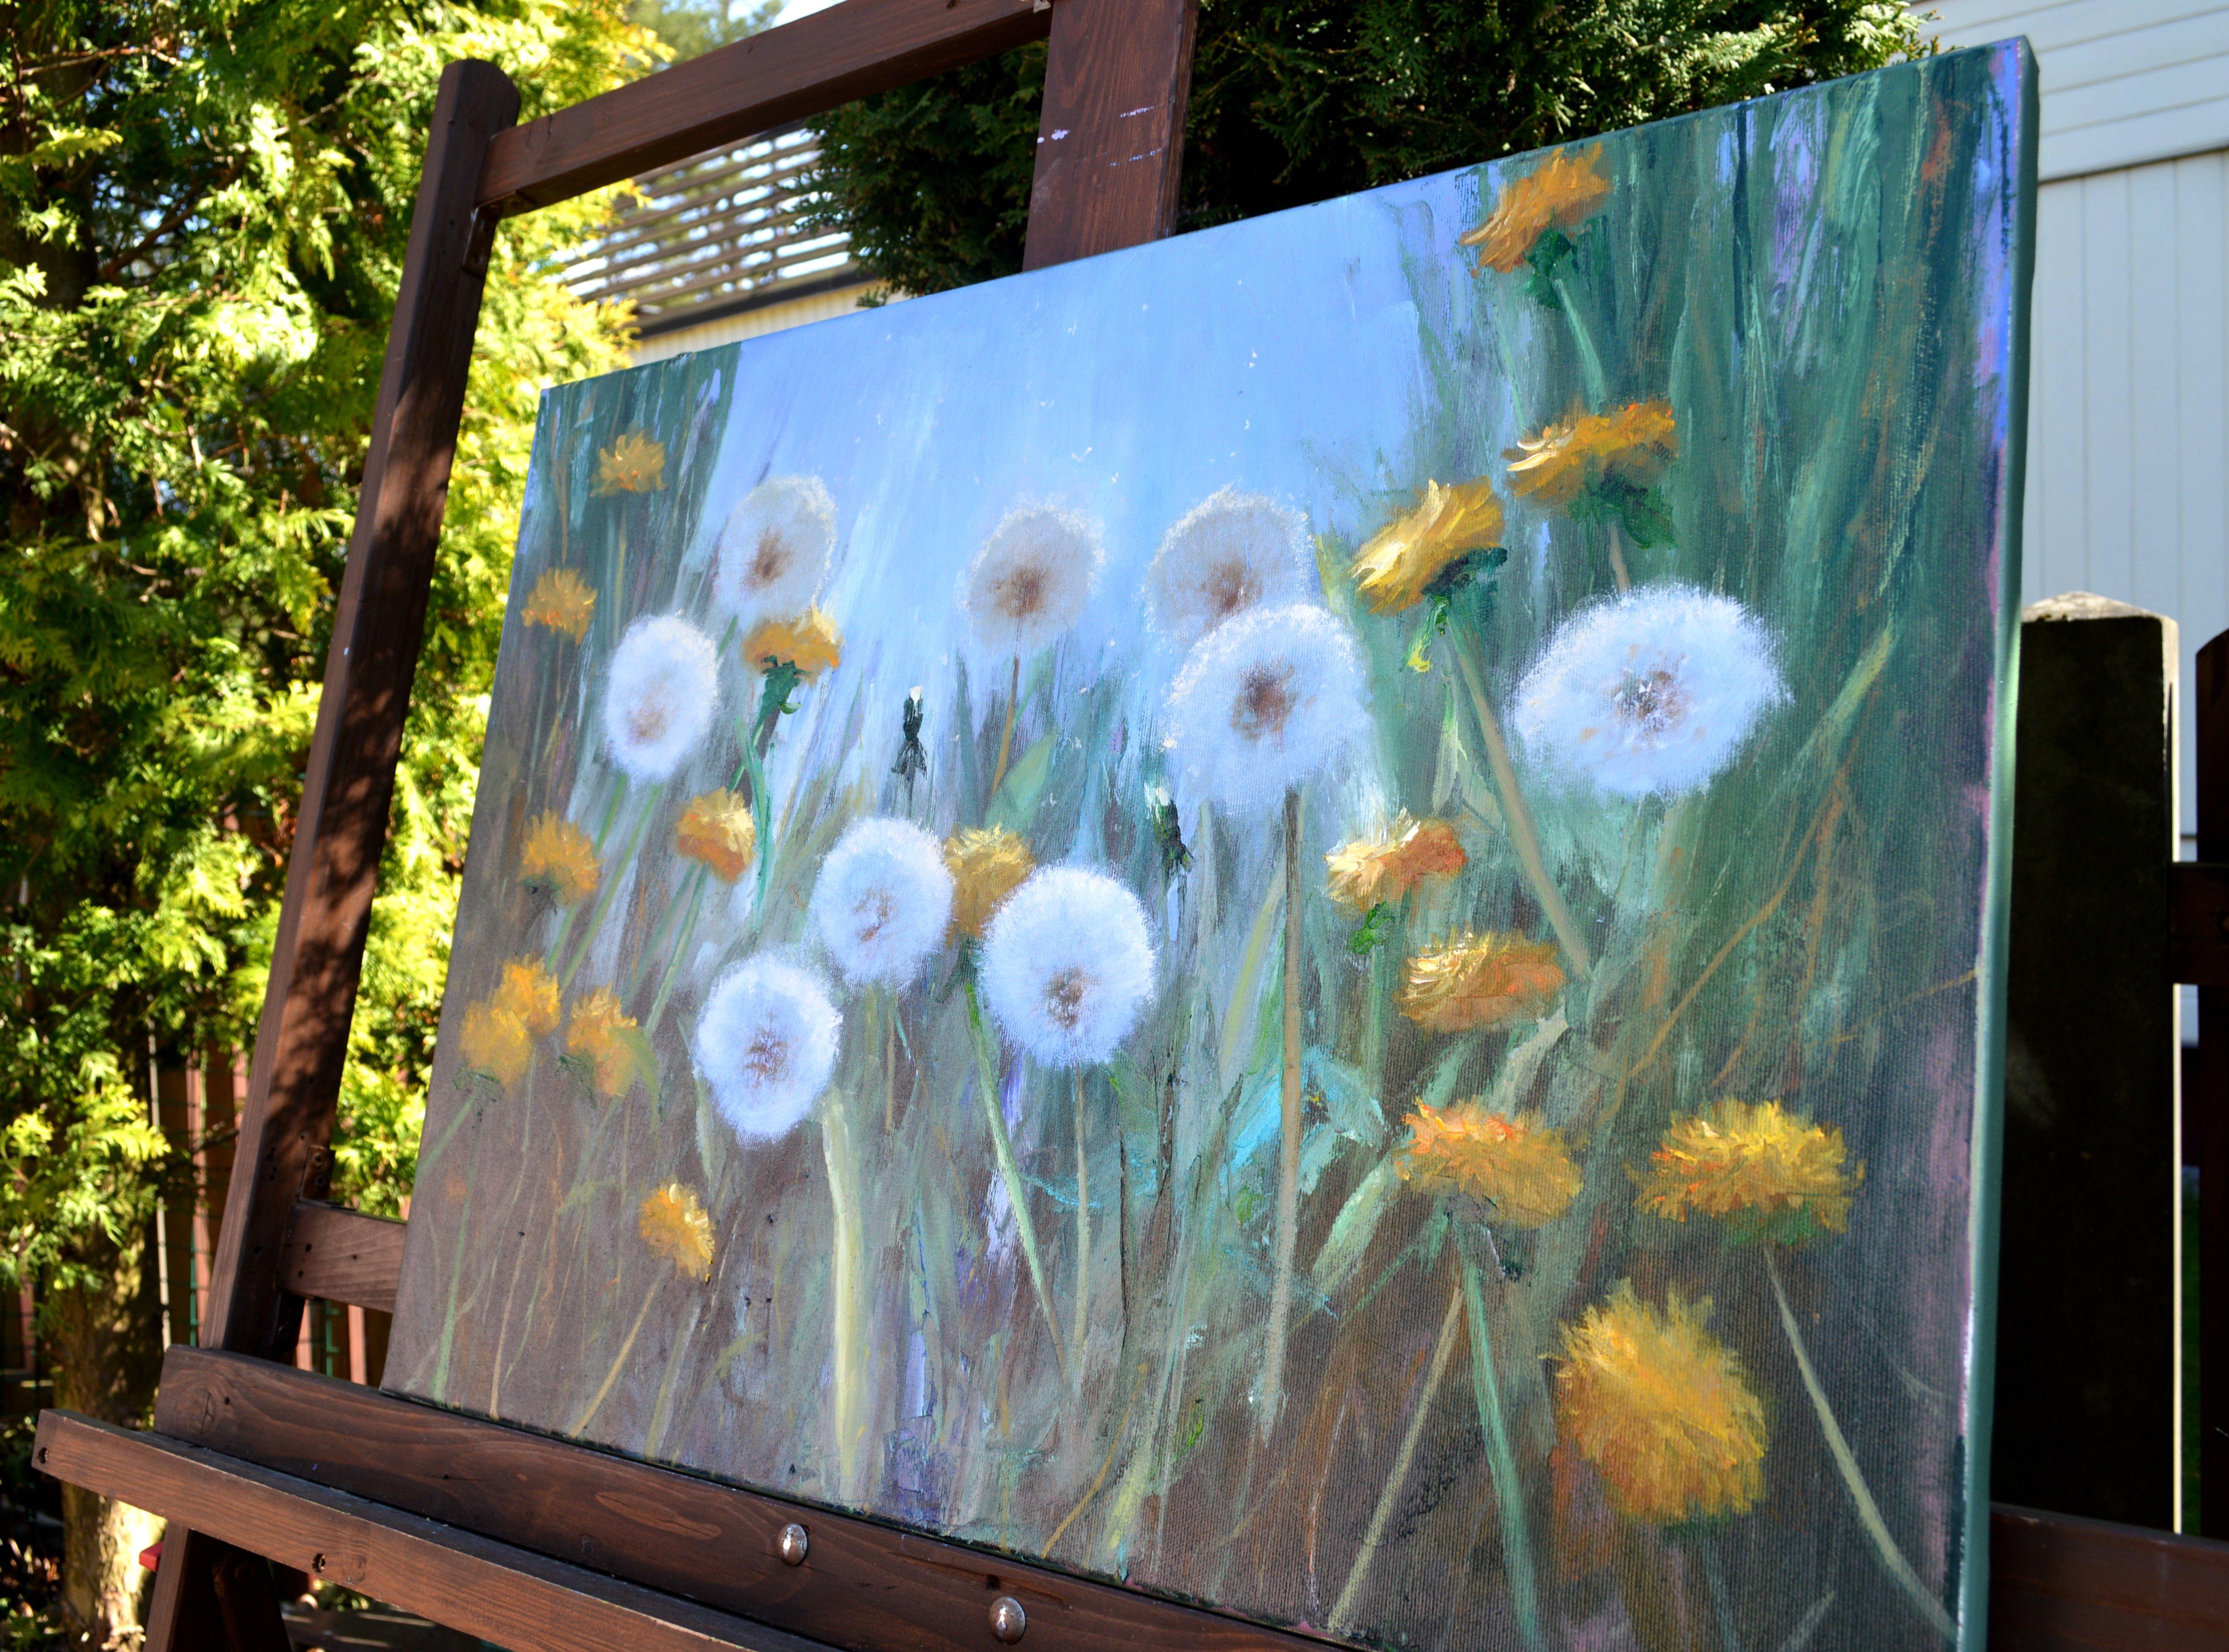 This work symbolizes our wonderful, beautiful and fragile, like a crystal world.
The magic field of solar dandelions from which it is impossible to take your eyes off. A short moment and there will be no trace of them.
In this oil painting, I've